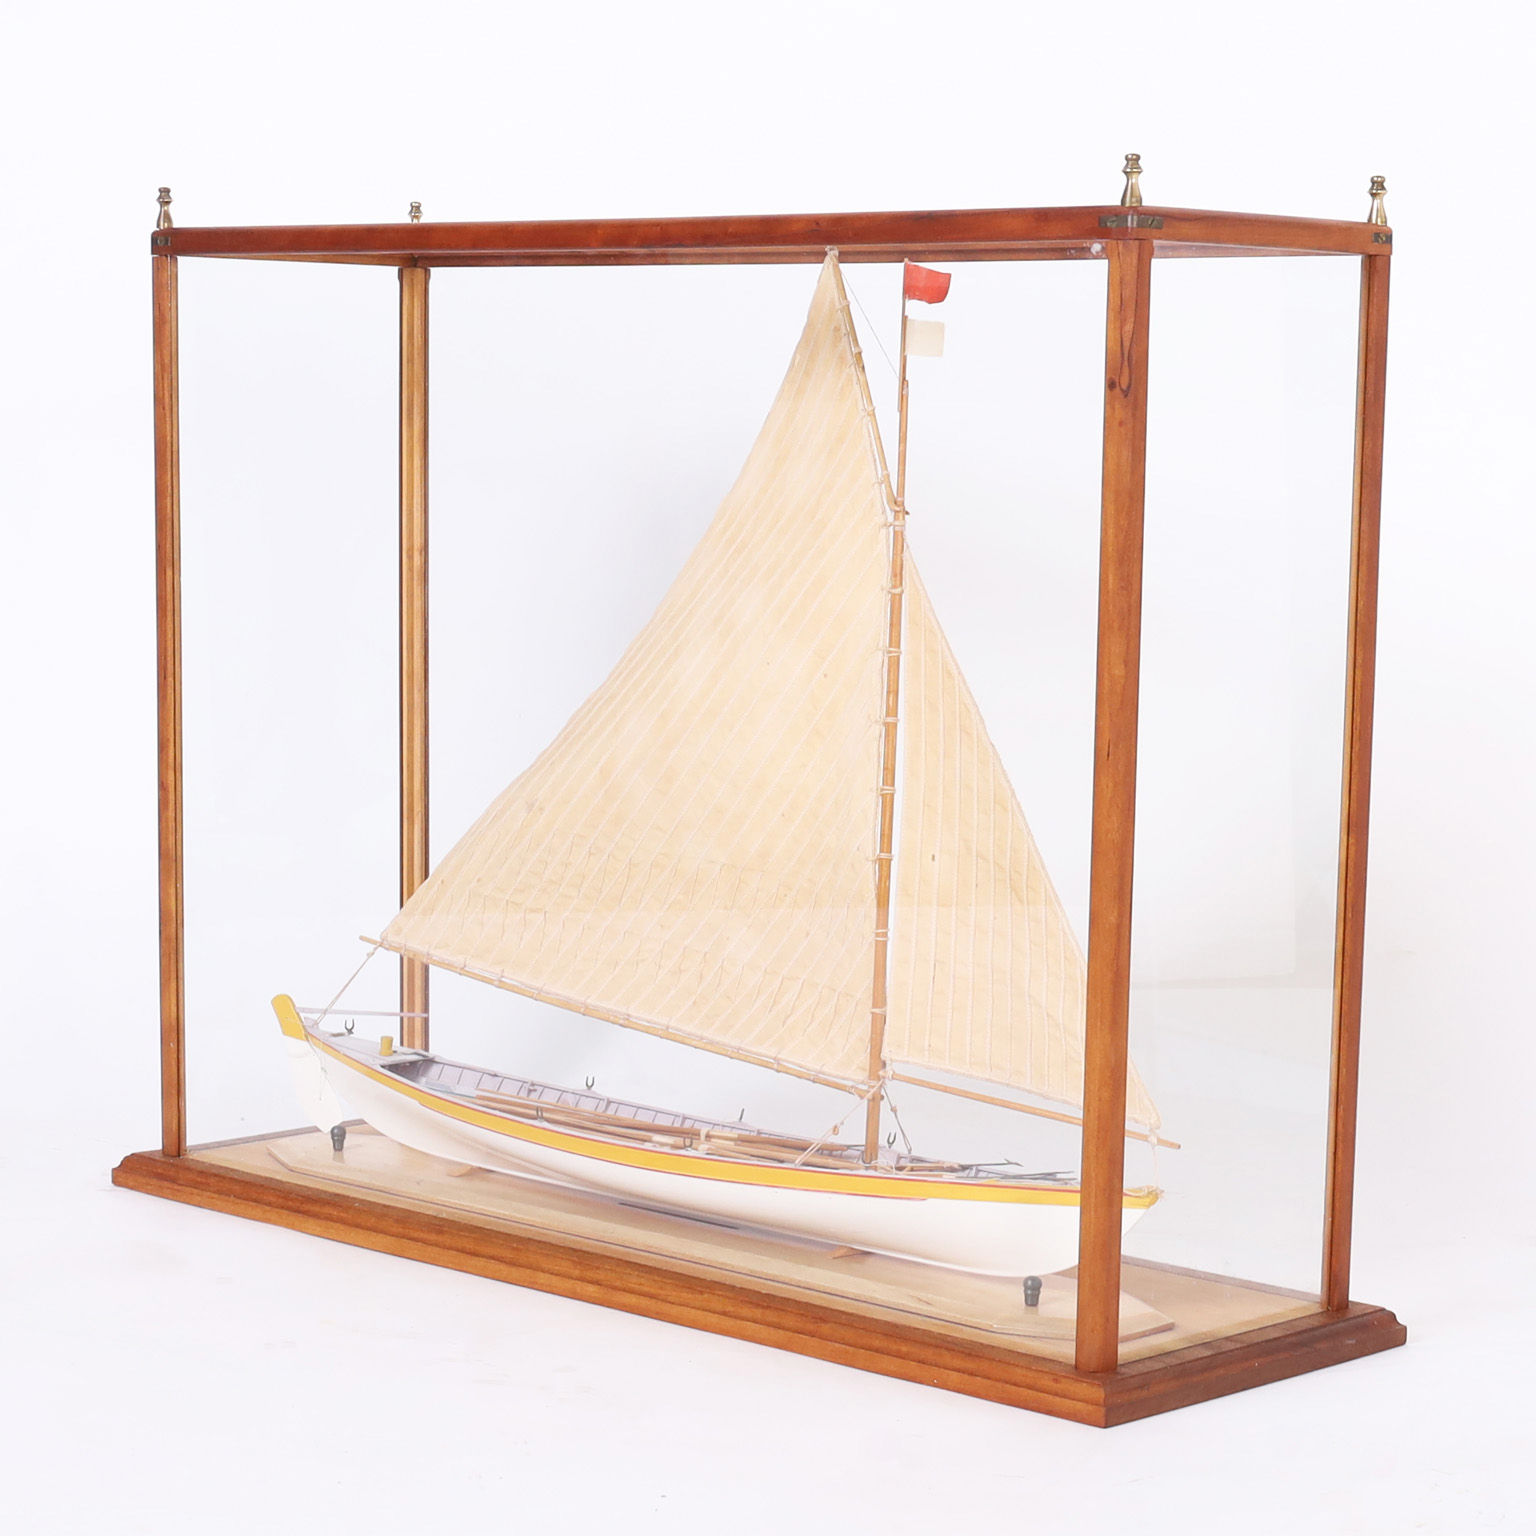 Cased Model of a Whaling Longboat